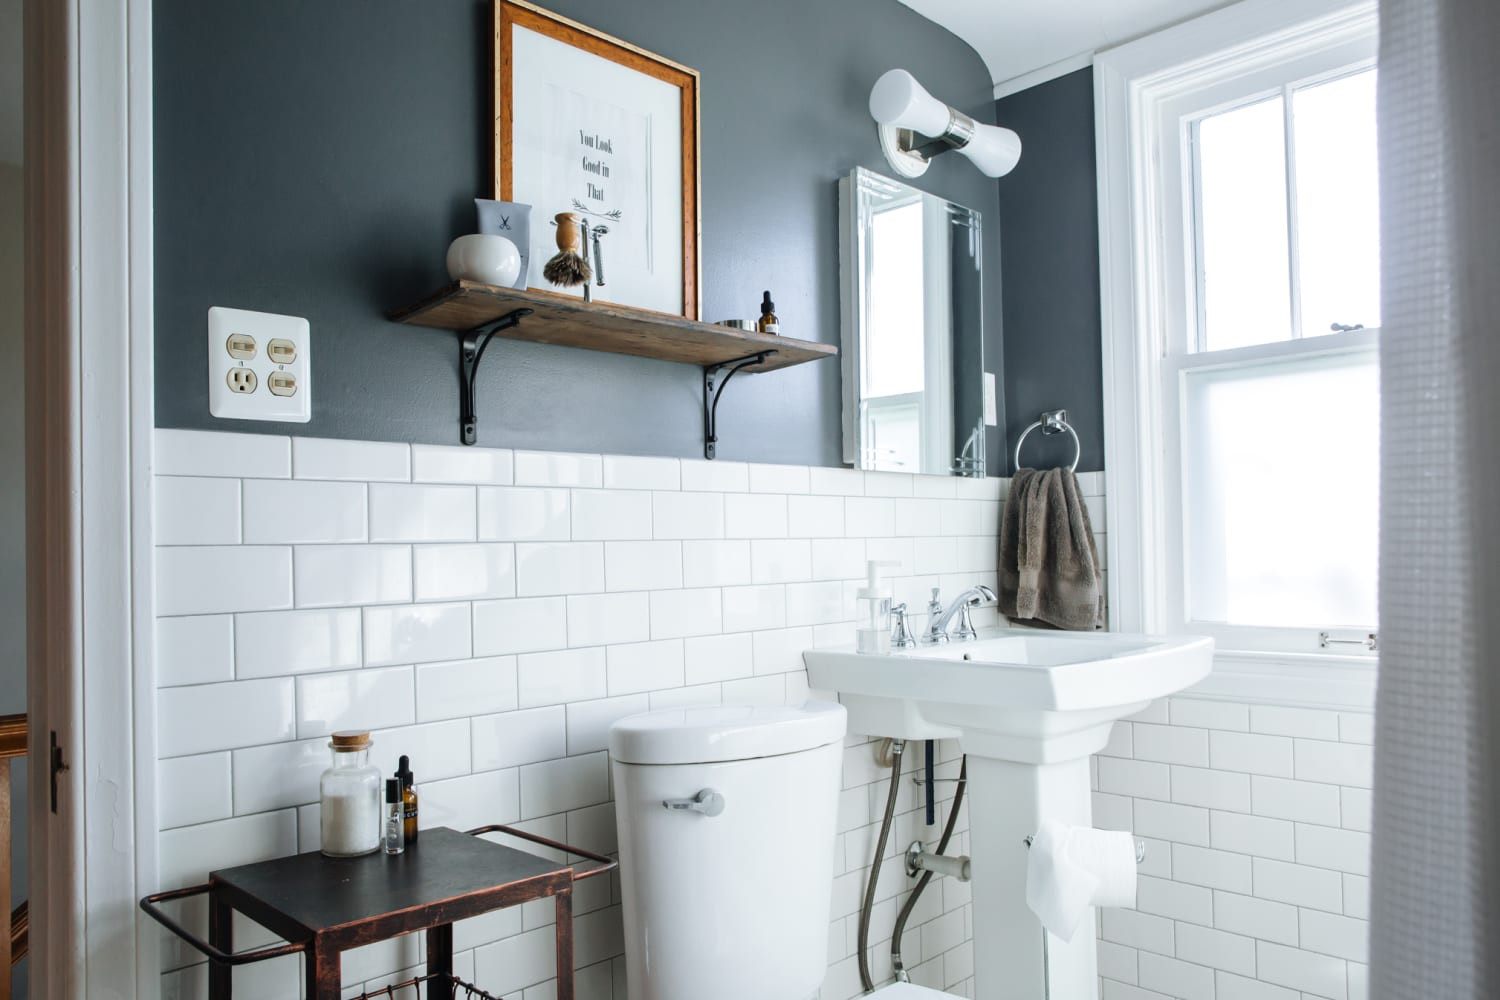 Paint Colors For A Bathroom
 Best Paint Colors for Small Bathrooms